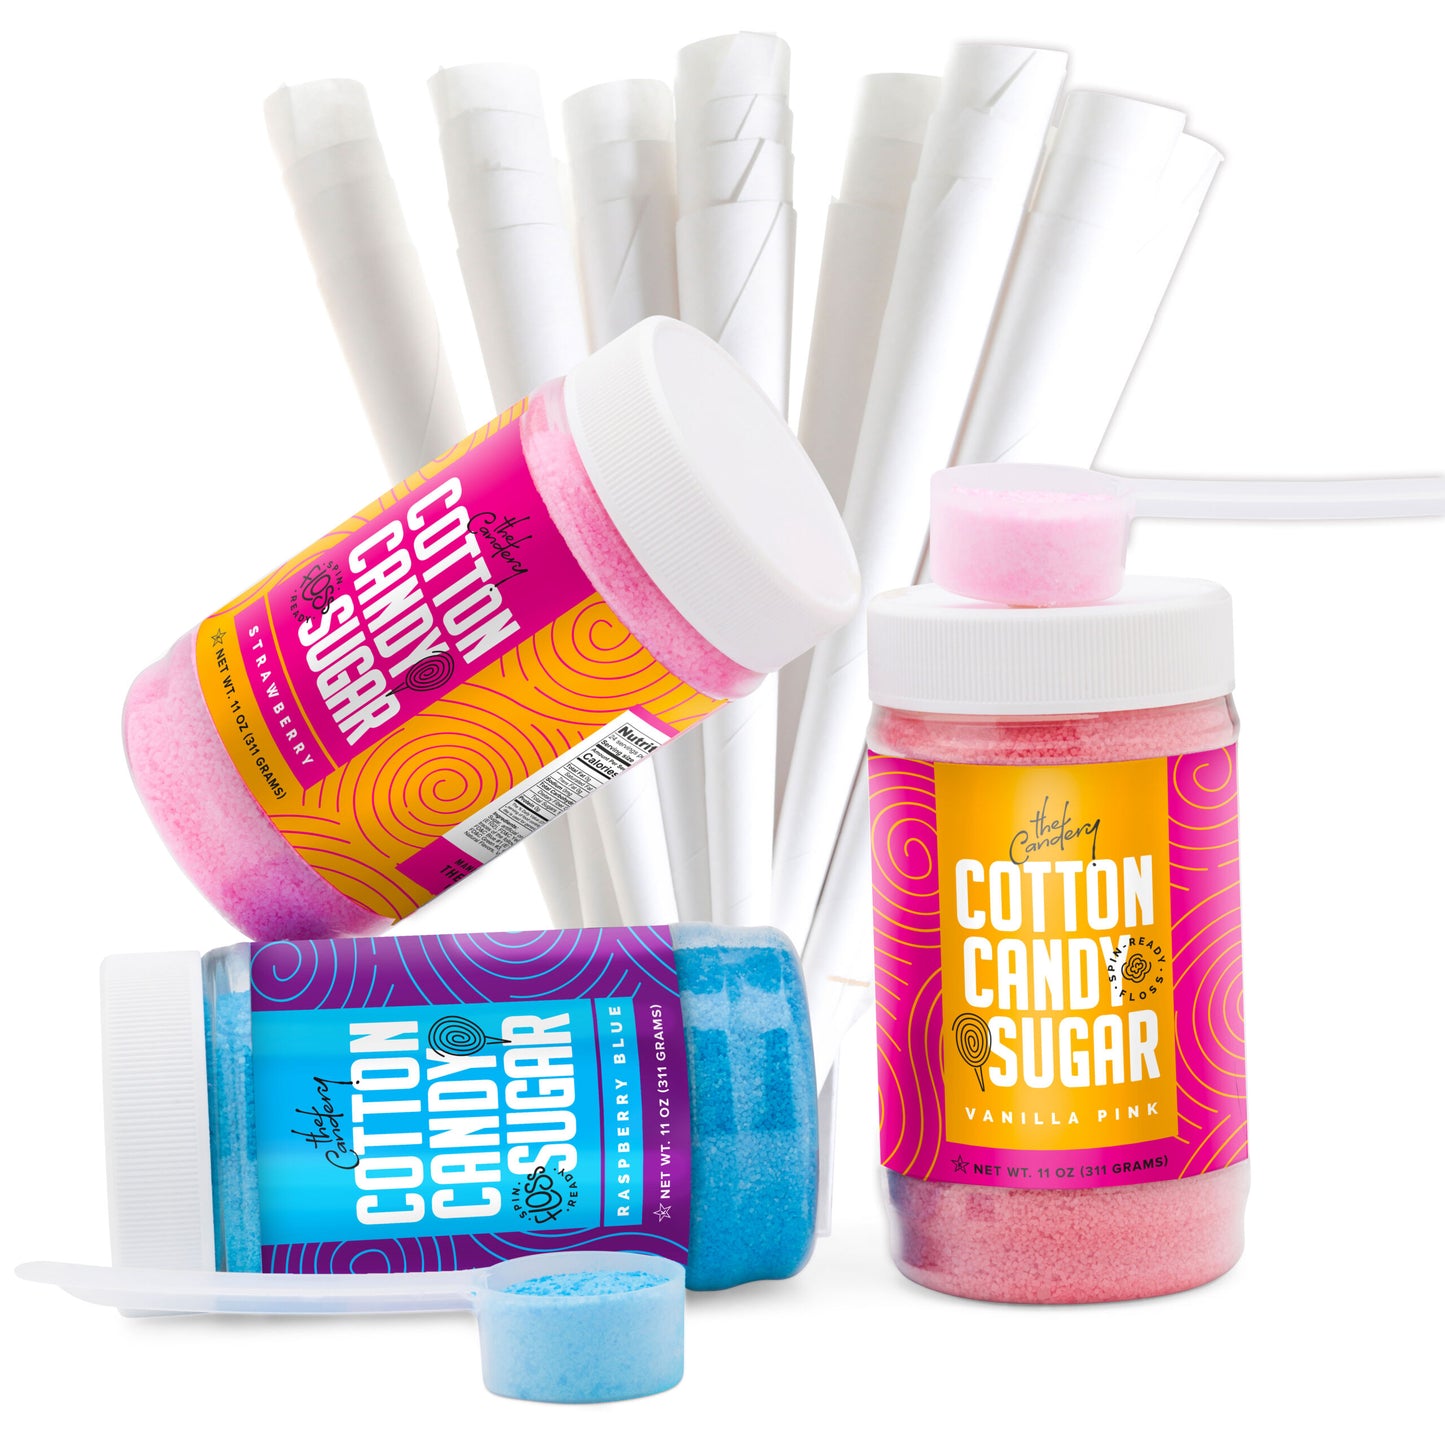 3-Pack Small (11 oz) Cotton Candy Floss Sugar With 50 Cones